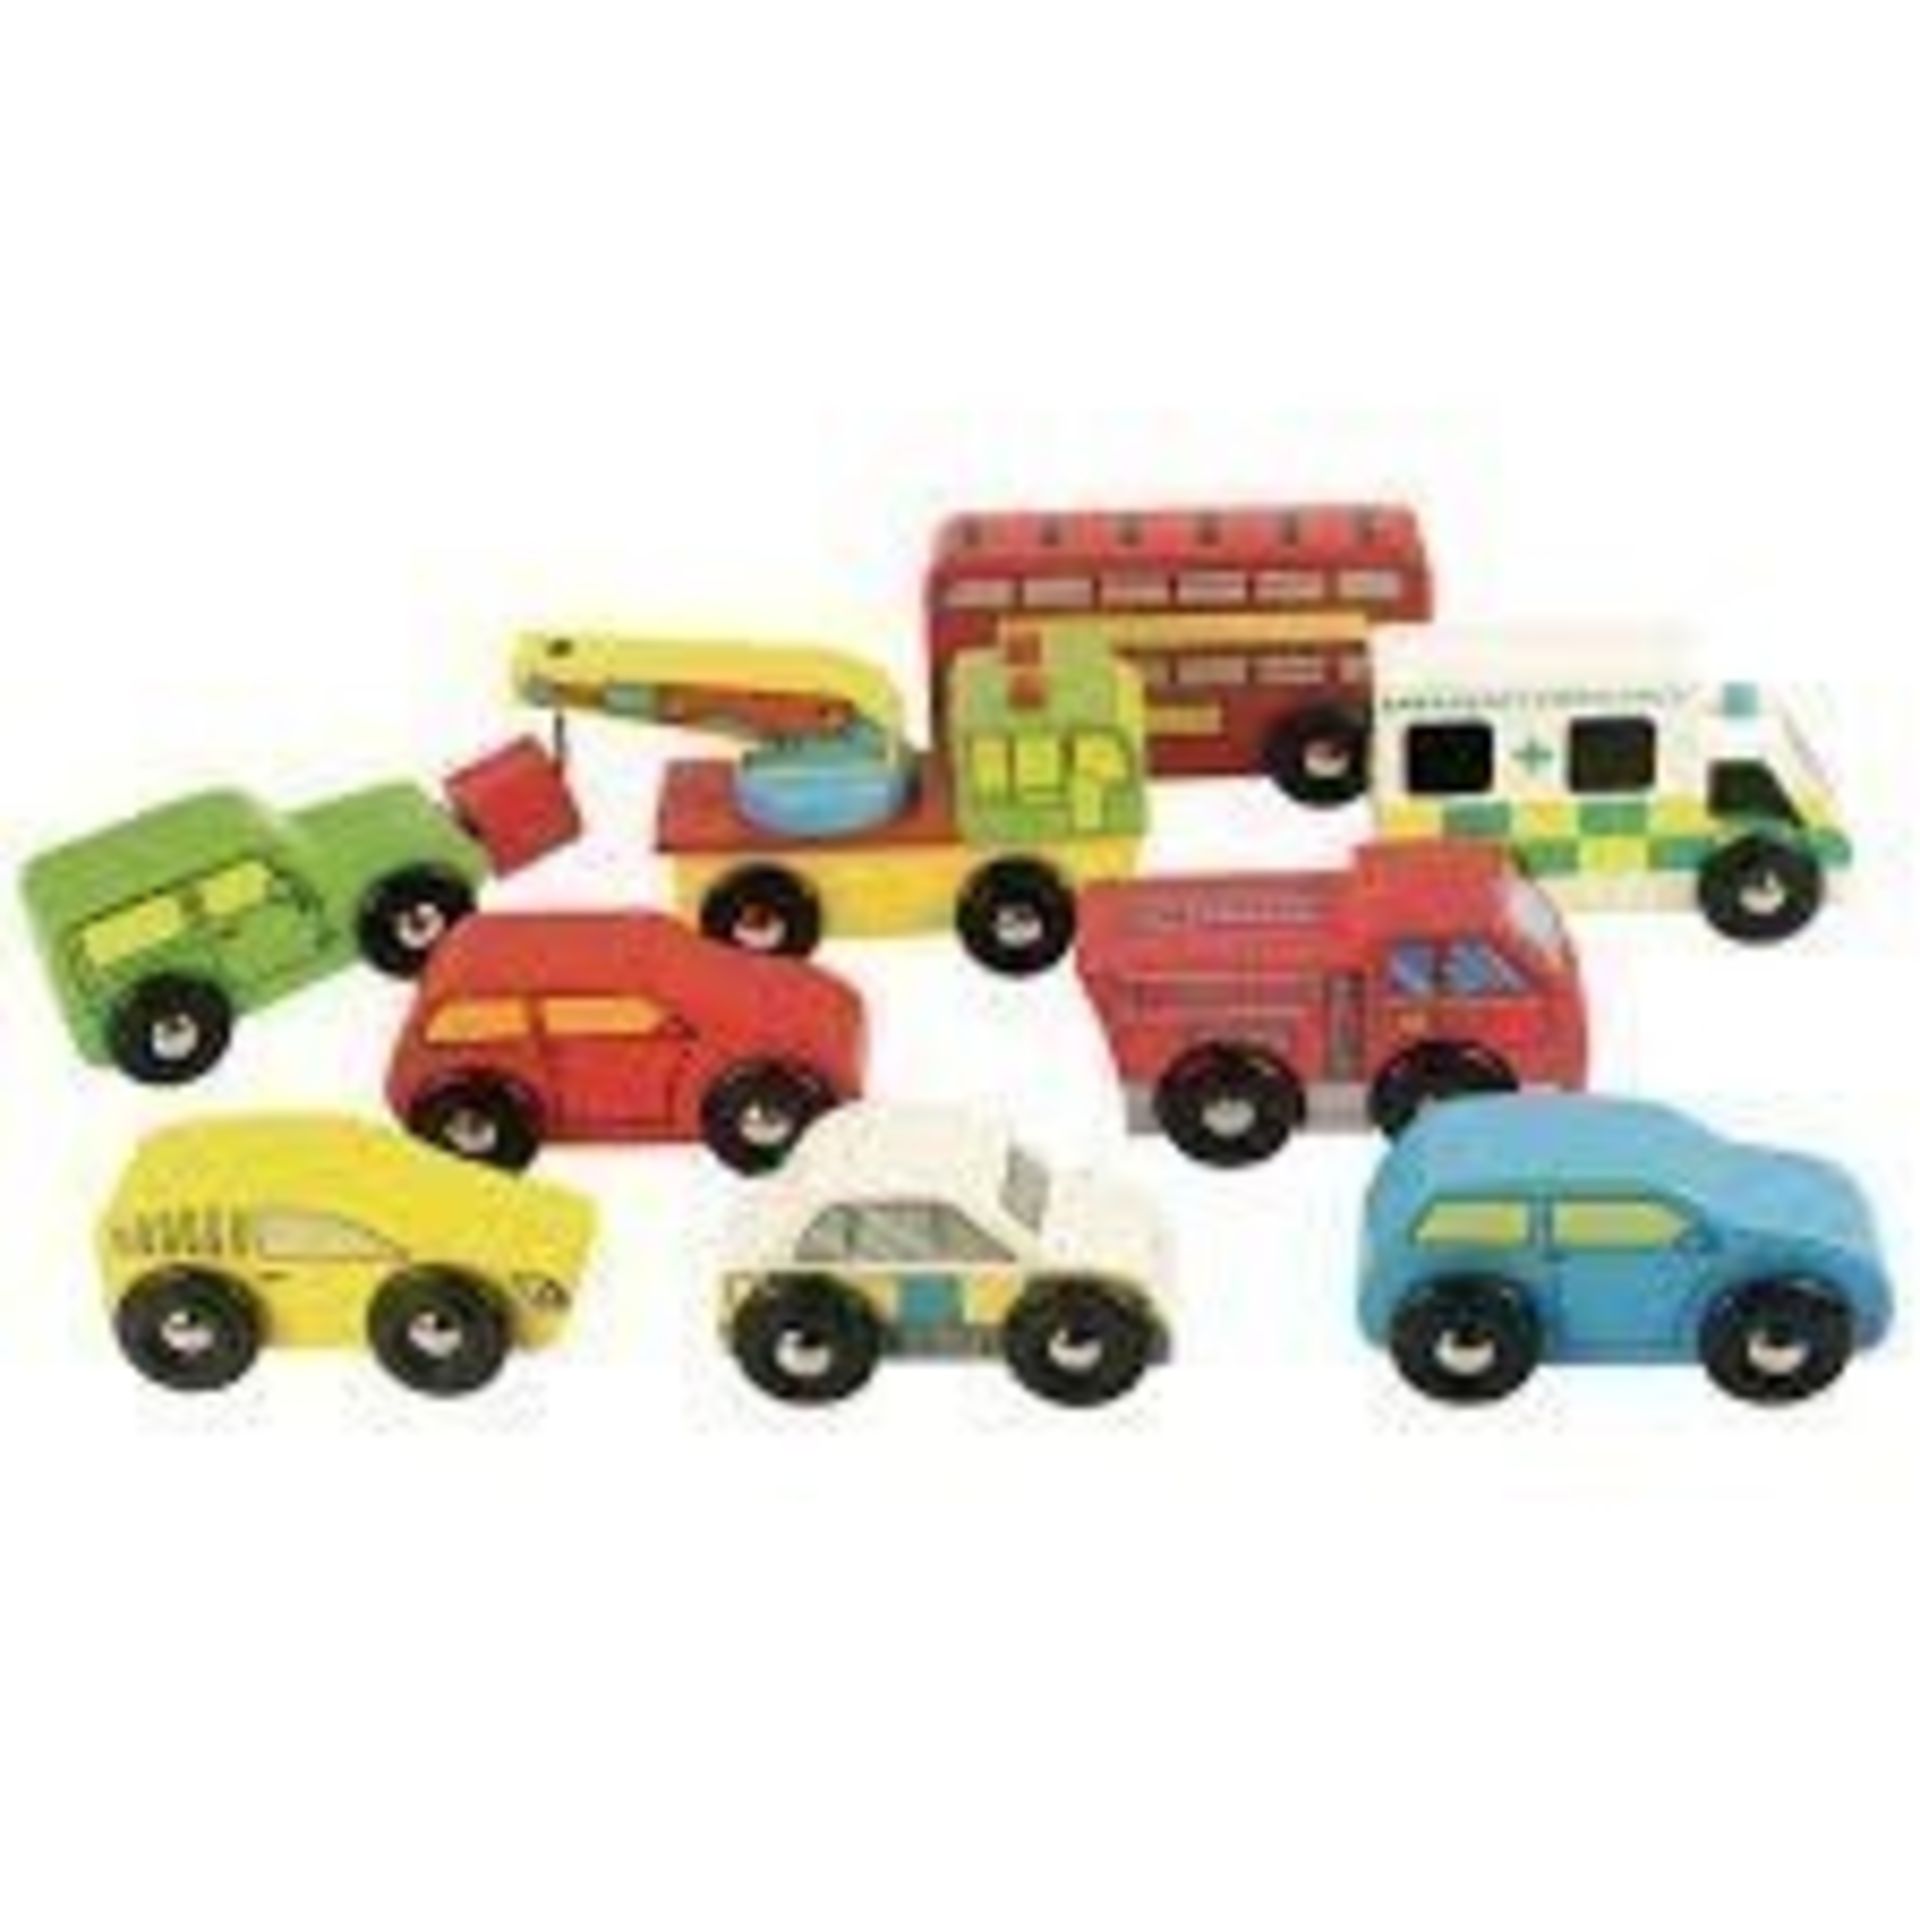 Lot To Contain 6 Sets Of 4 My First Emergency Vehicles Wooden Push Along Childrens Toy Sets Combined